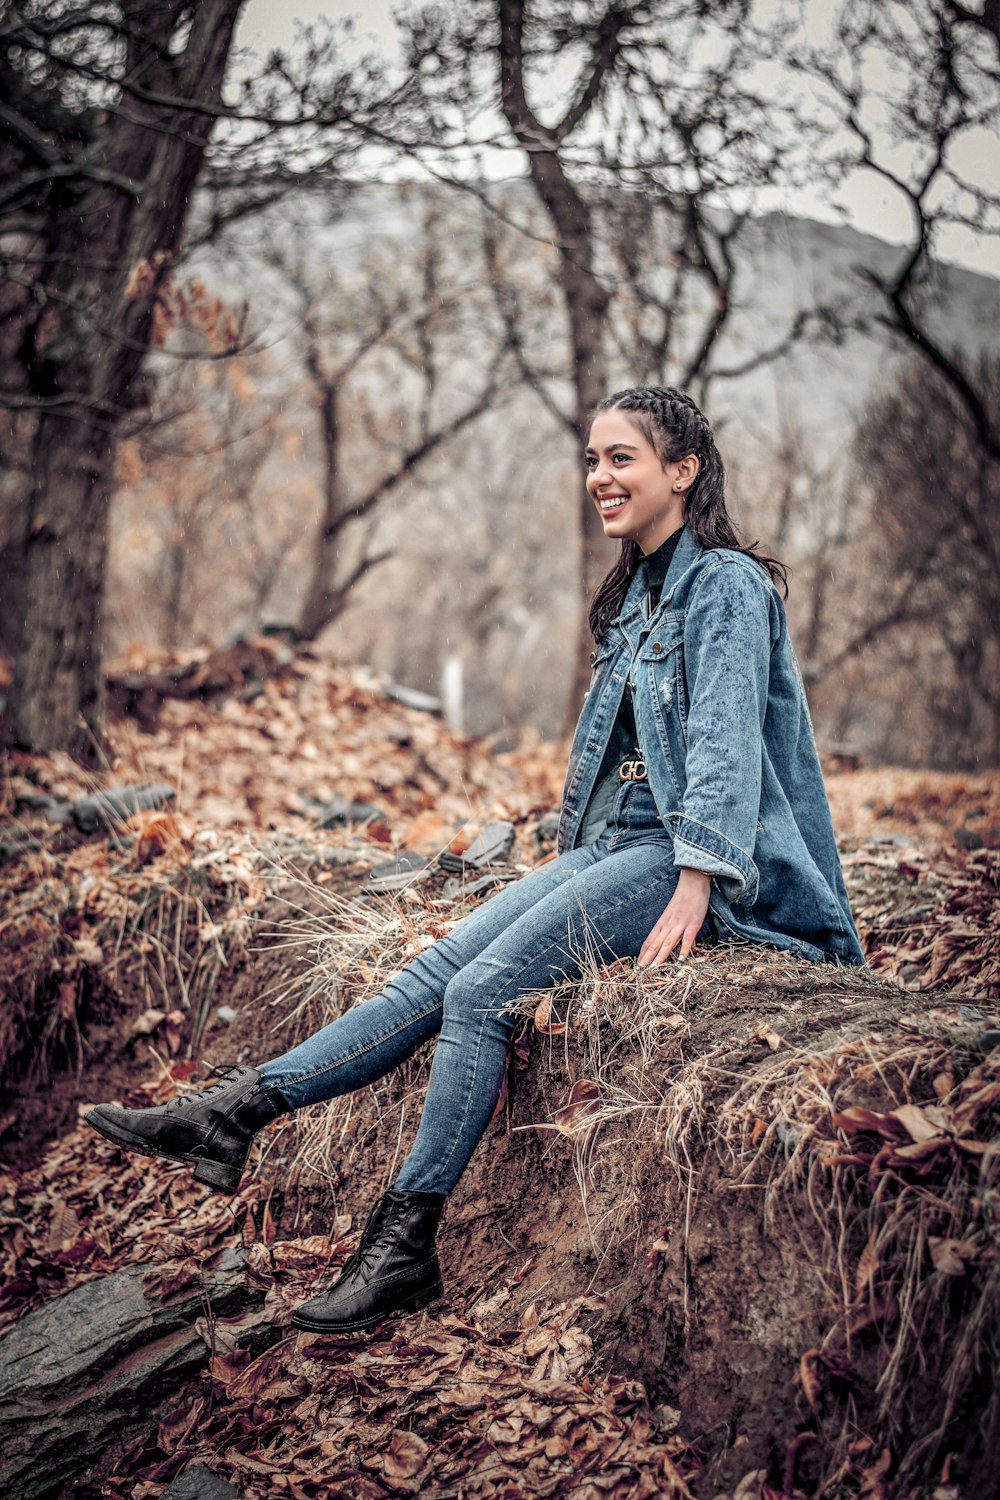 woman smiling and sitting on soil ground near trees